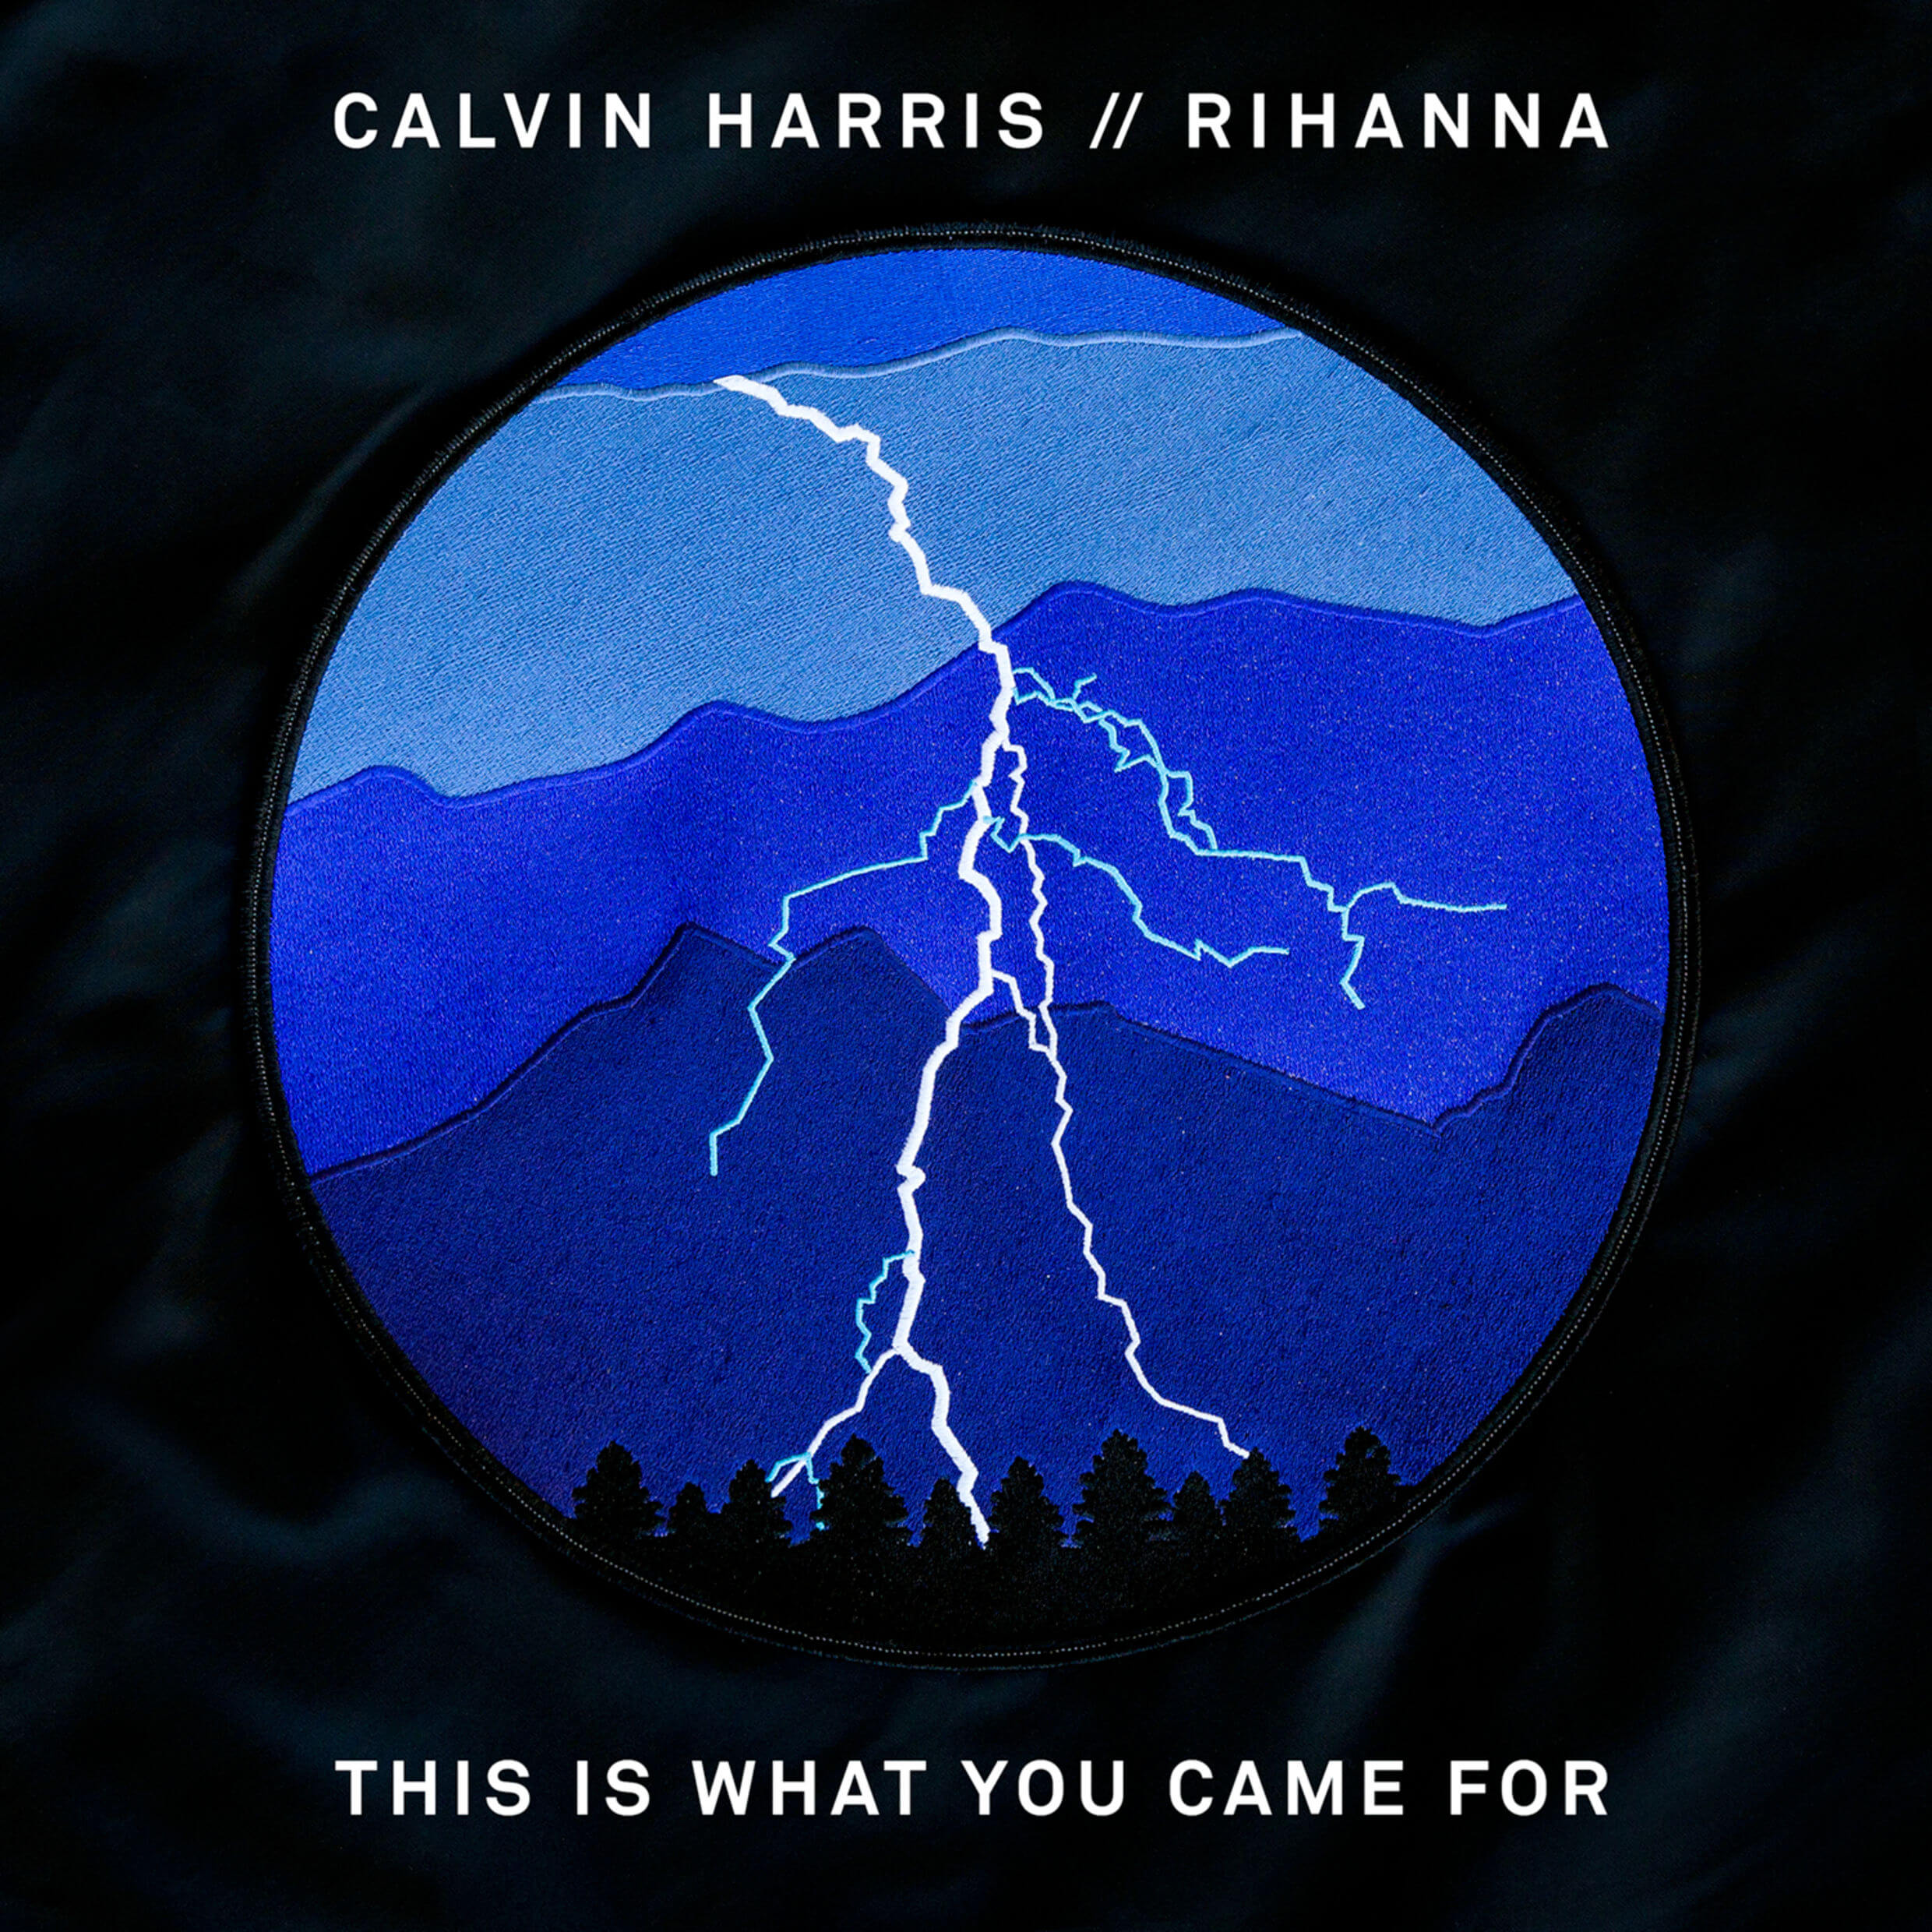 rihanna_e_calvin_harris_this_is_what_you_came_for